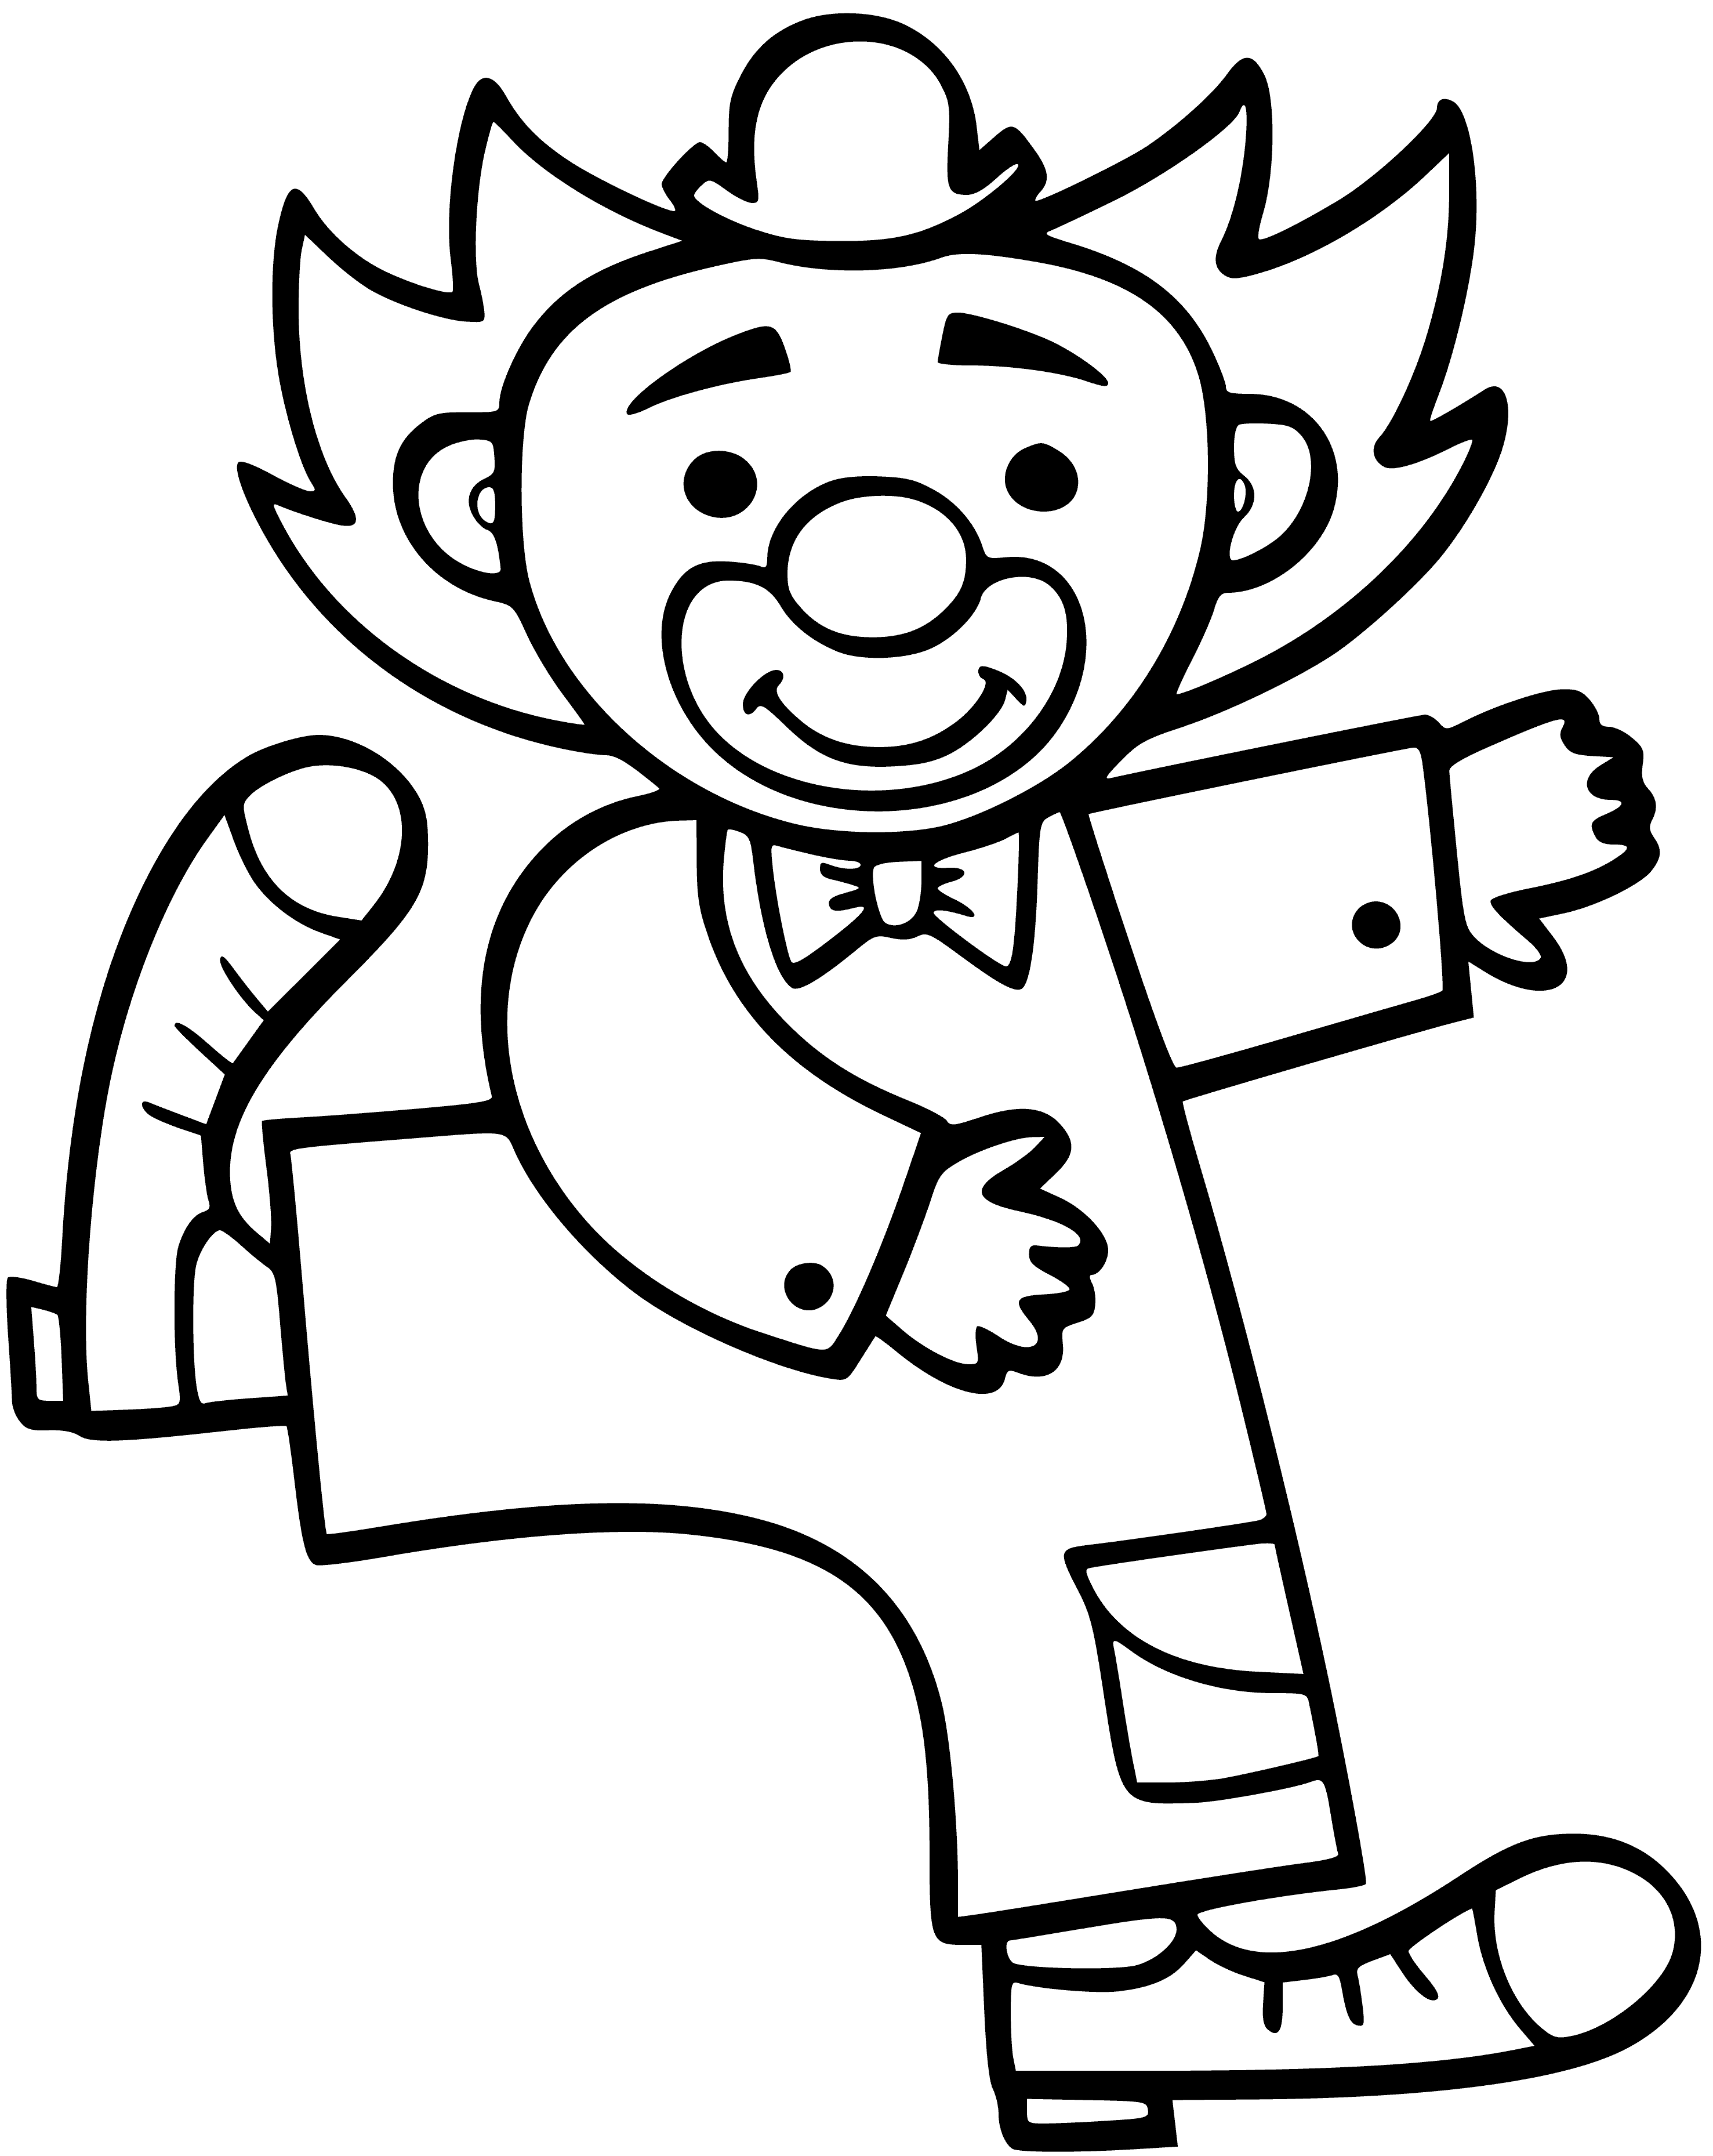 coloring page: Clowns entertain kids & adults with colorful makeup & costumes, often working in circuses, at parties & other events.